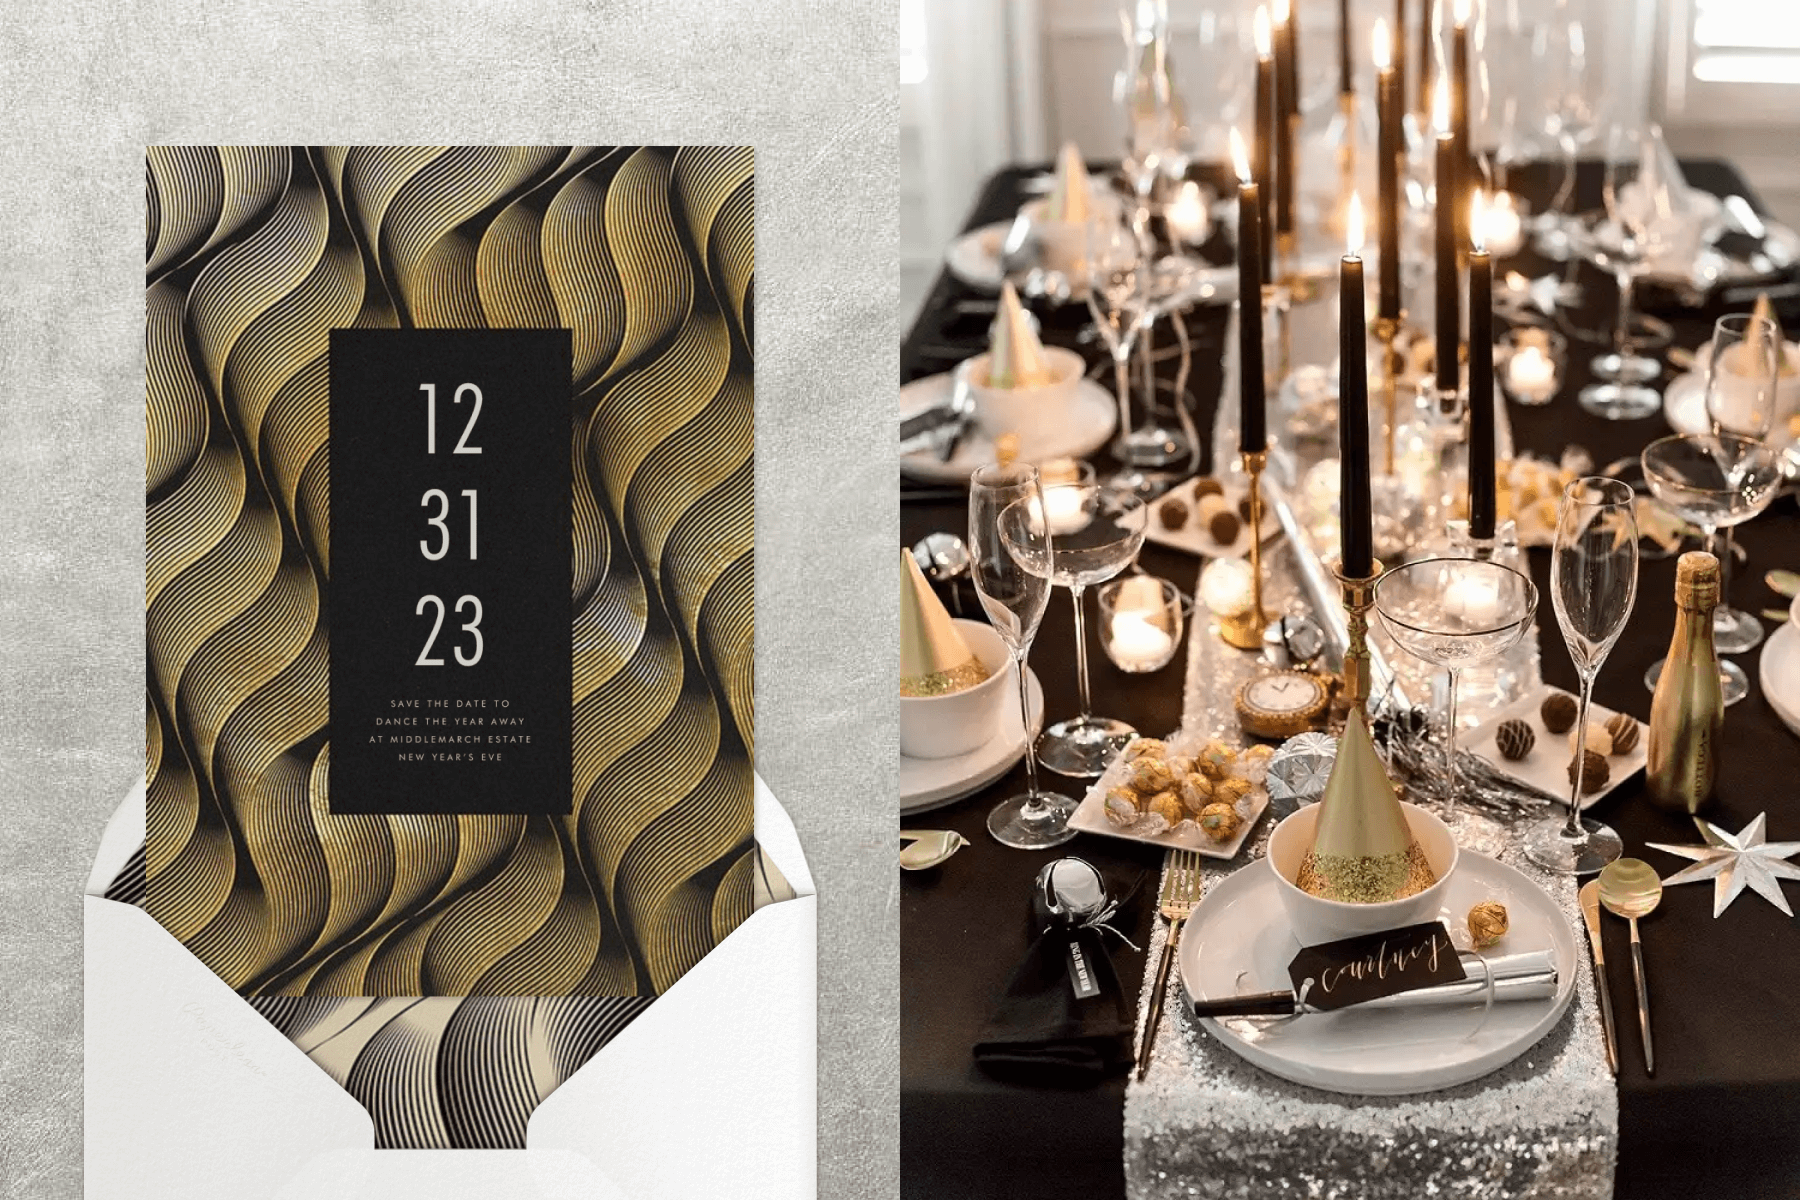 Left: A card with a graphic depiction of gold waves and a black rectangle in the center that reads “12/31/23.” Right: A cluttered table with black candles, empty coupe glasses, party hats, and noise makers.